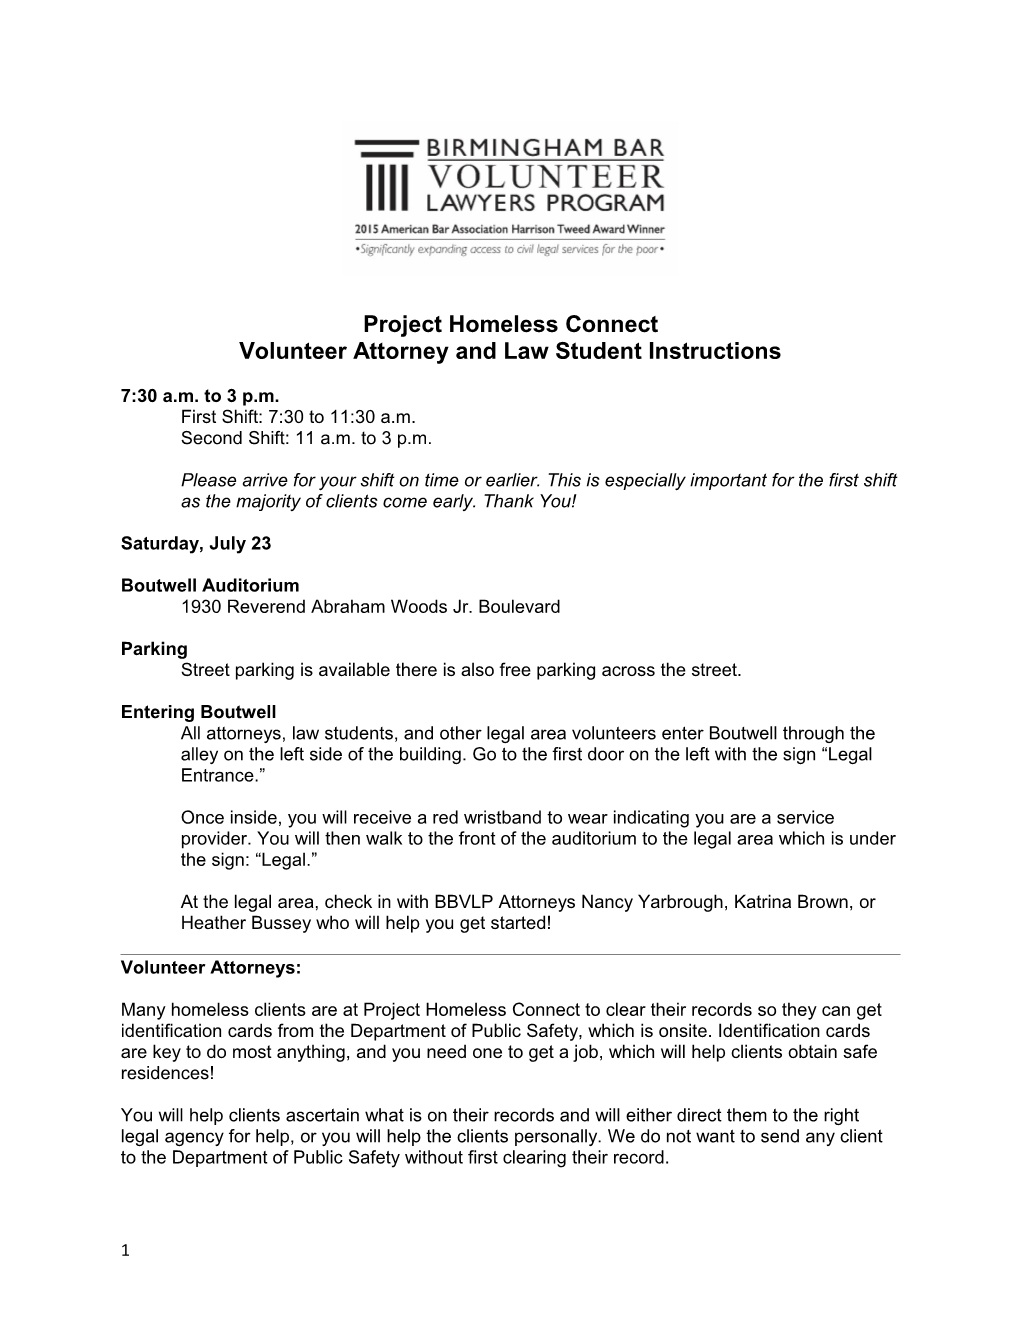 Volunteer Attorney and Law Student Instructions